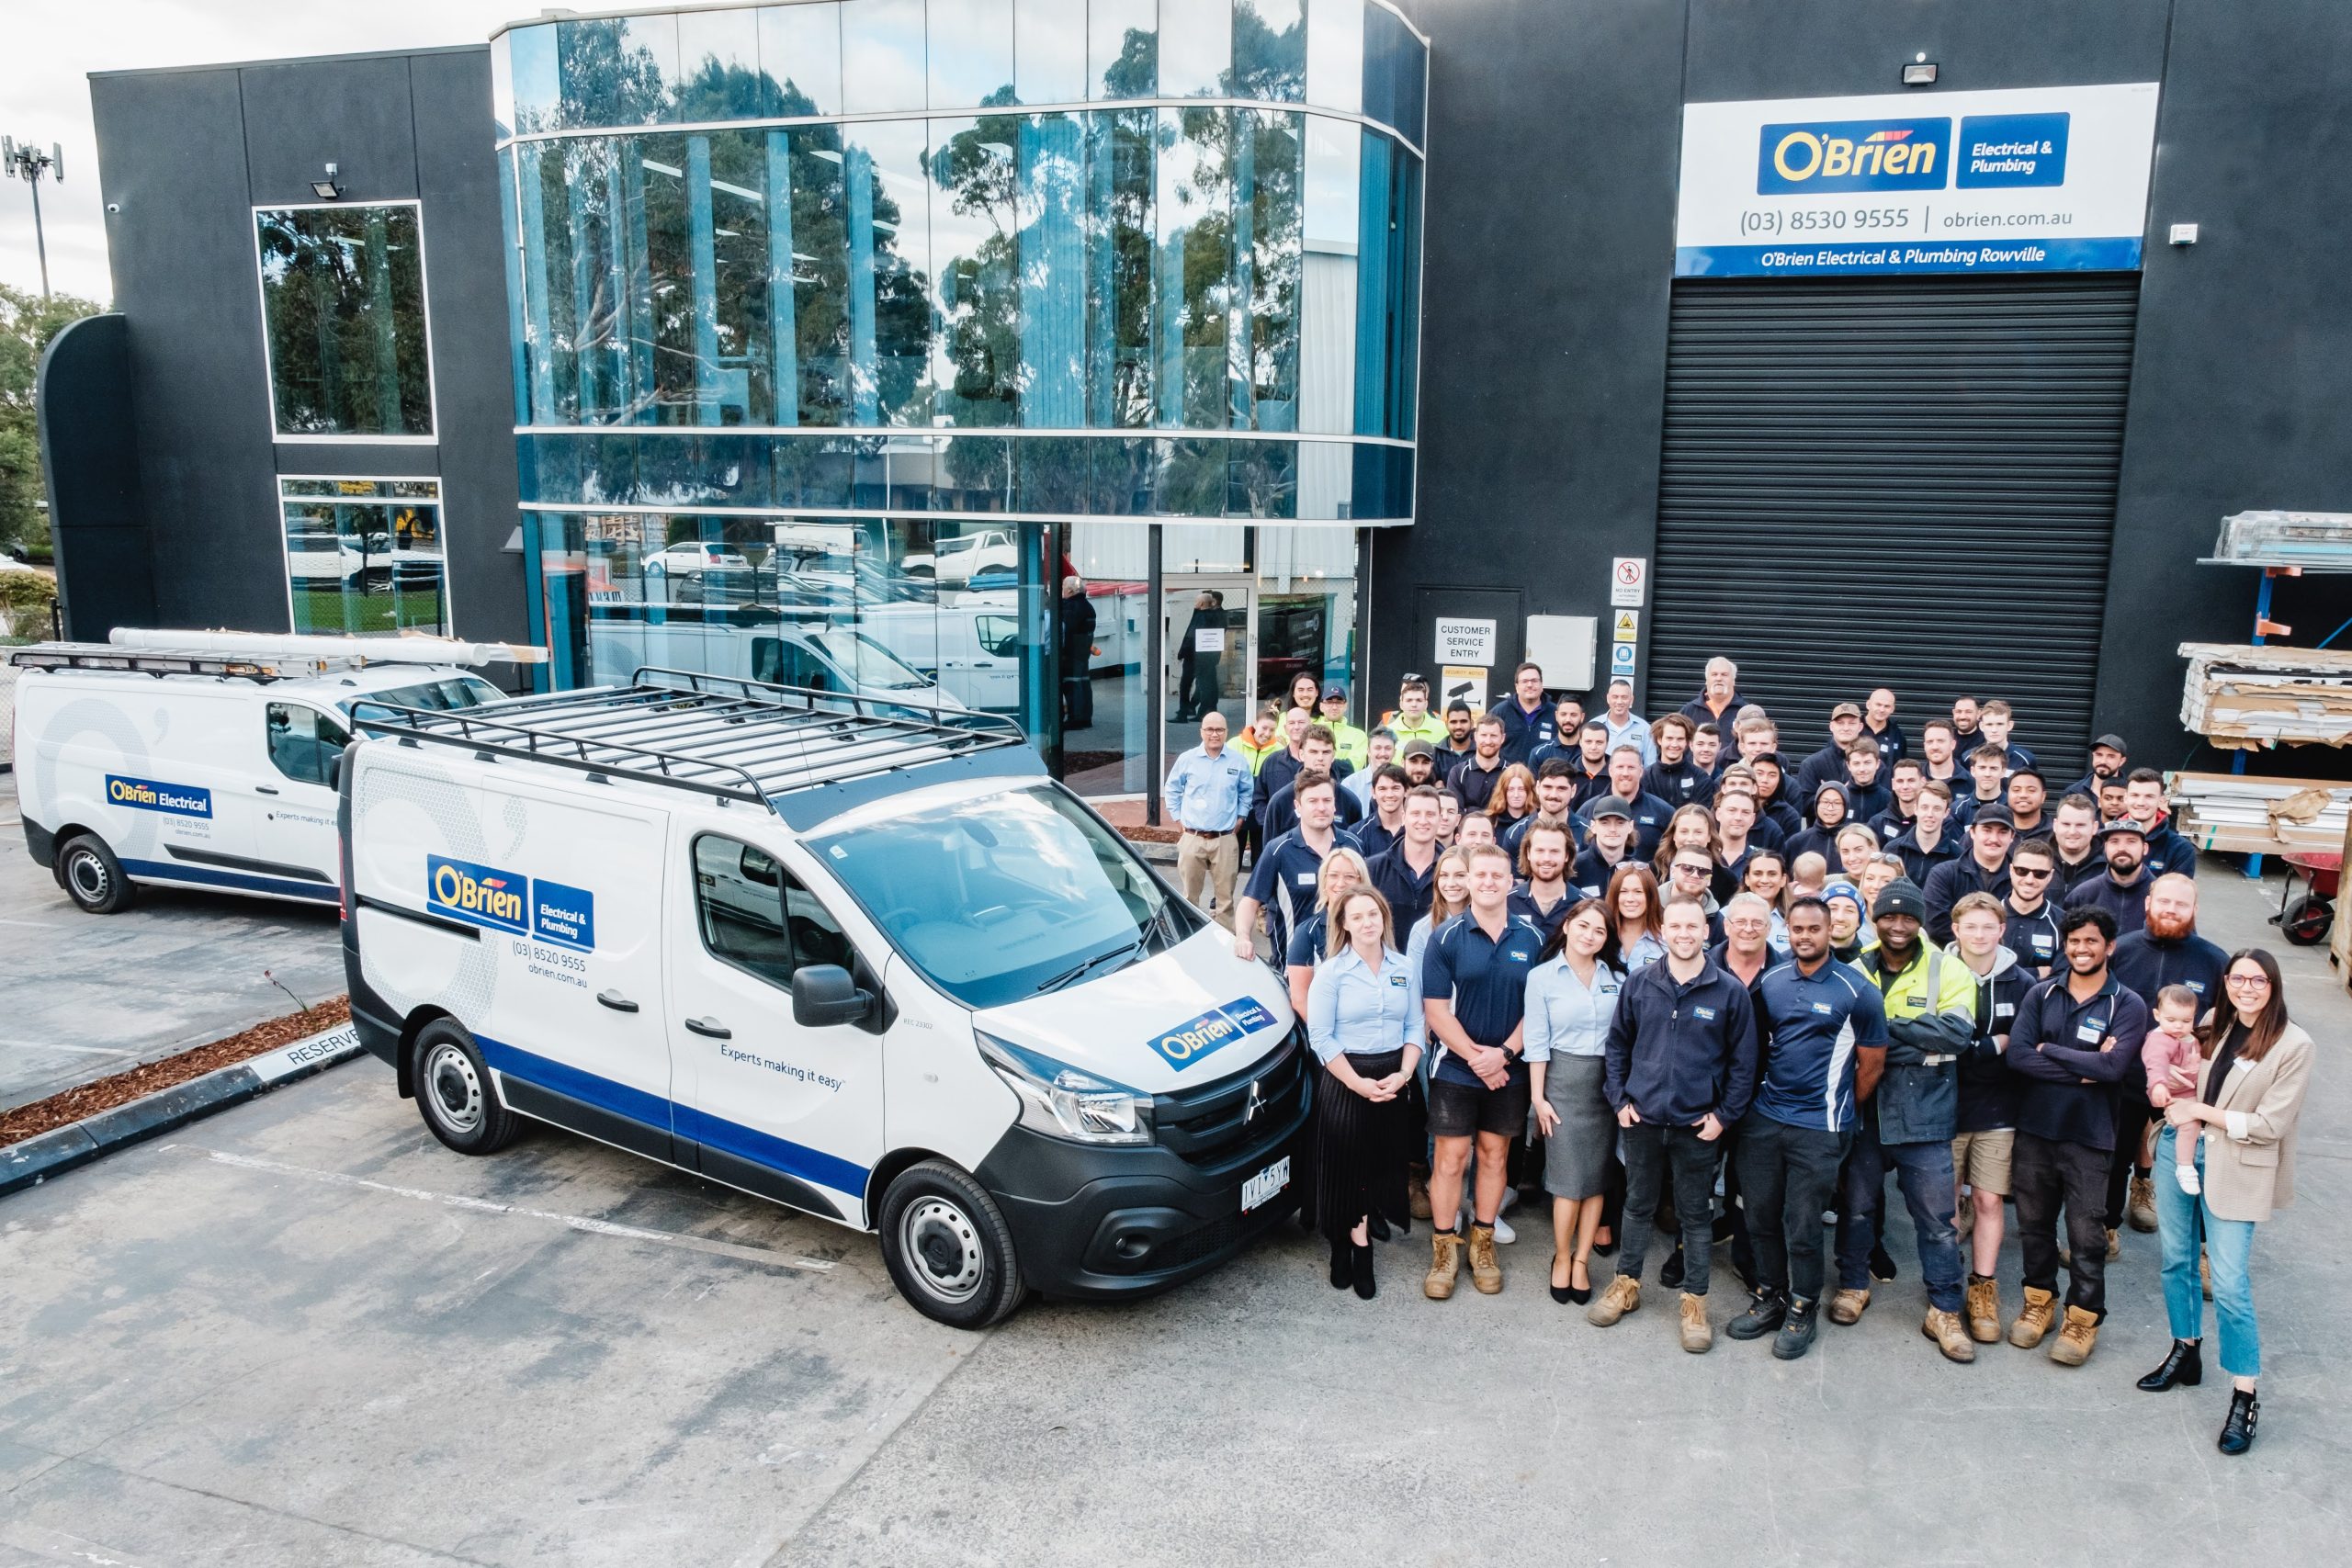 obrien-electrical-and-plumbing-rowville-team-and-service-vehicles-infront-of-branch